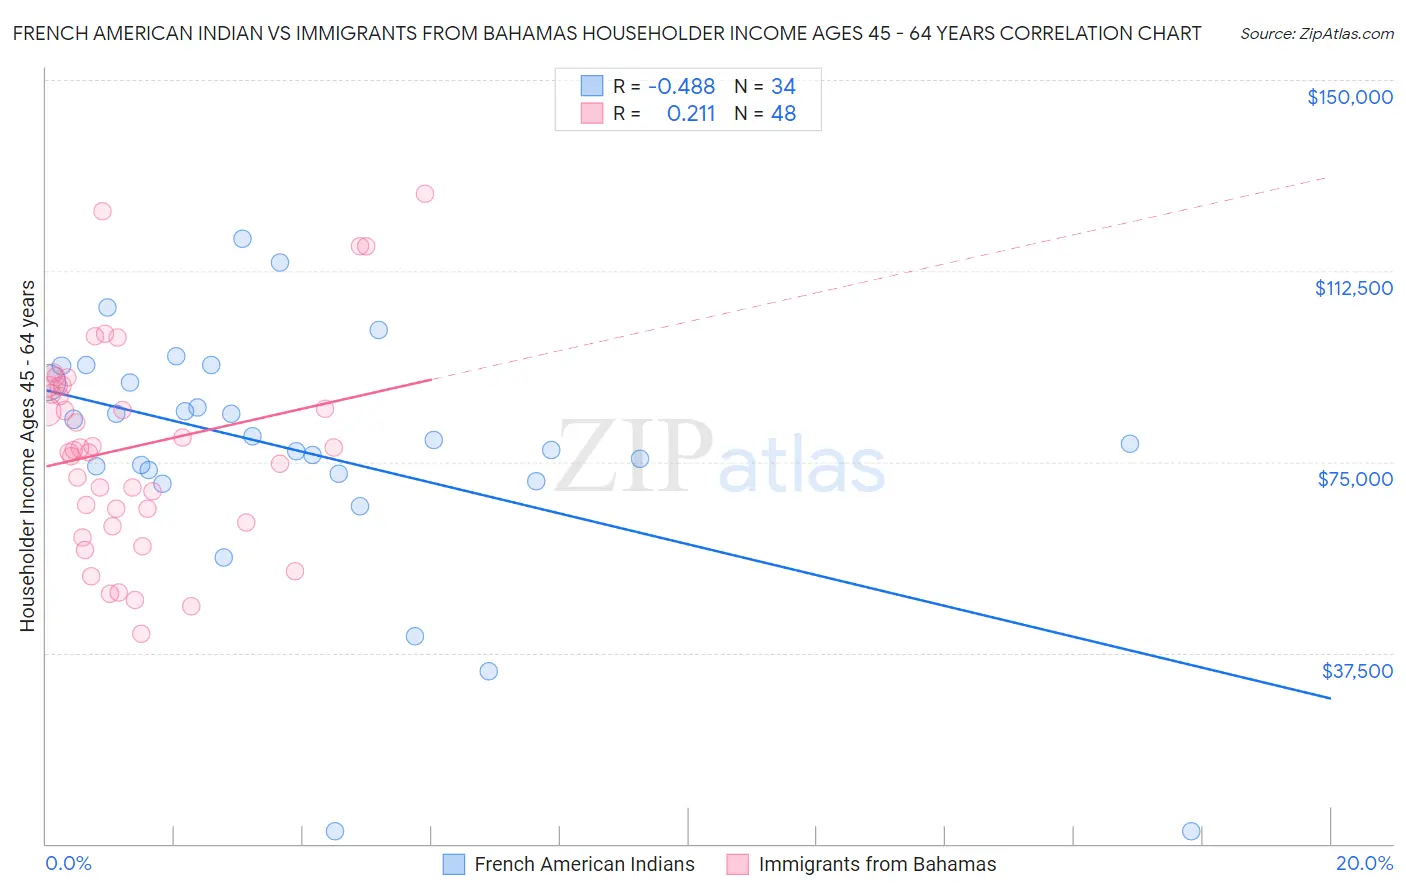 French American Indian vs Immigrants from Bahamas Householder Income Ages 45 - 64 years